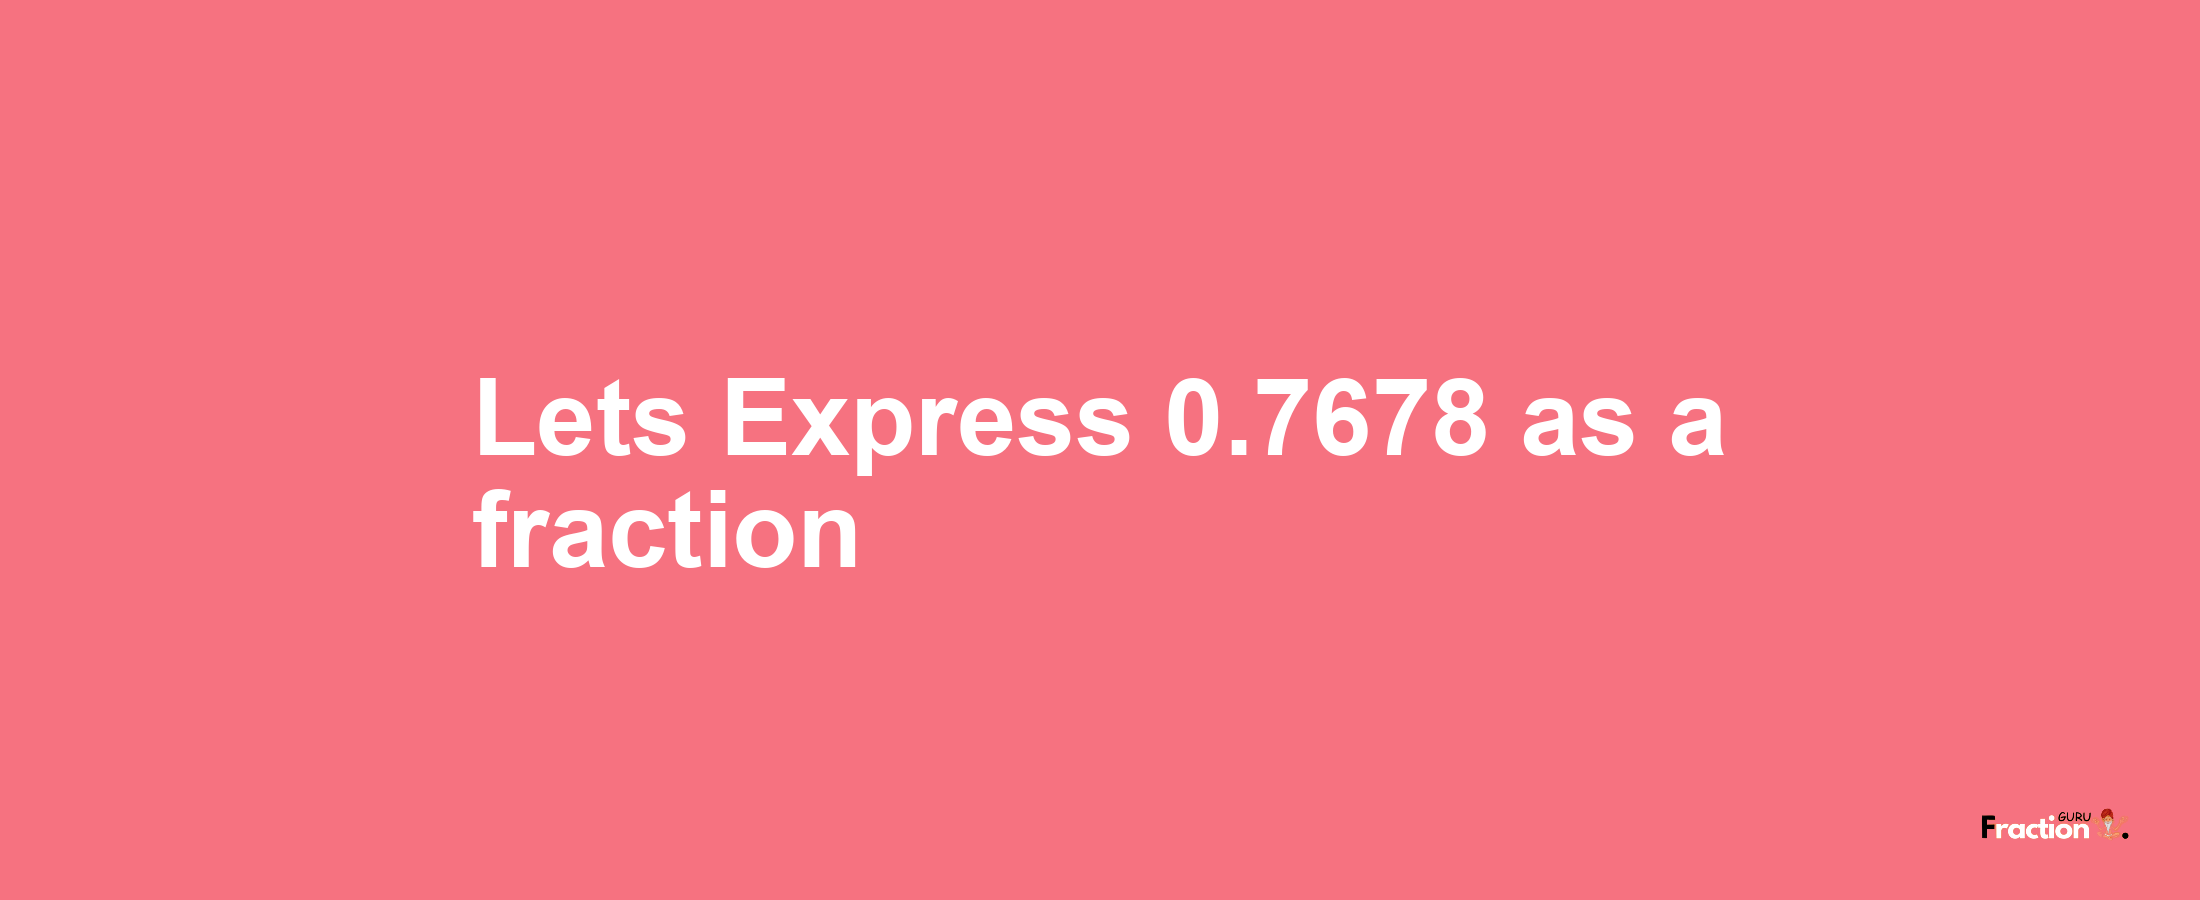 Lets Express 0.7678 as afraction